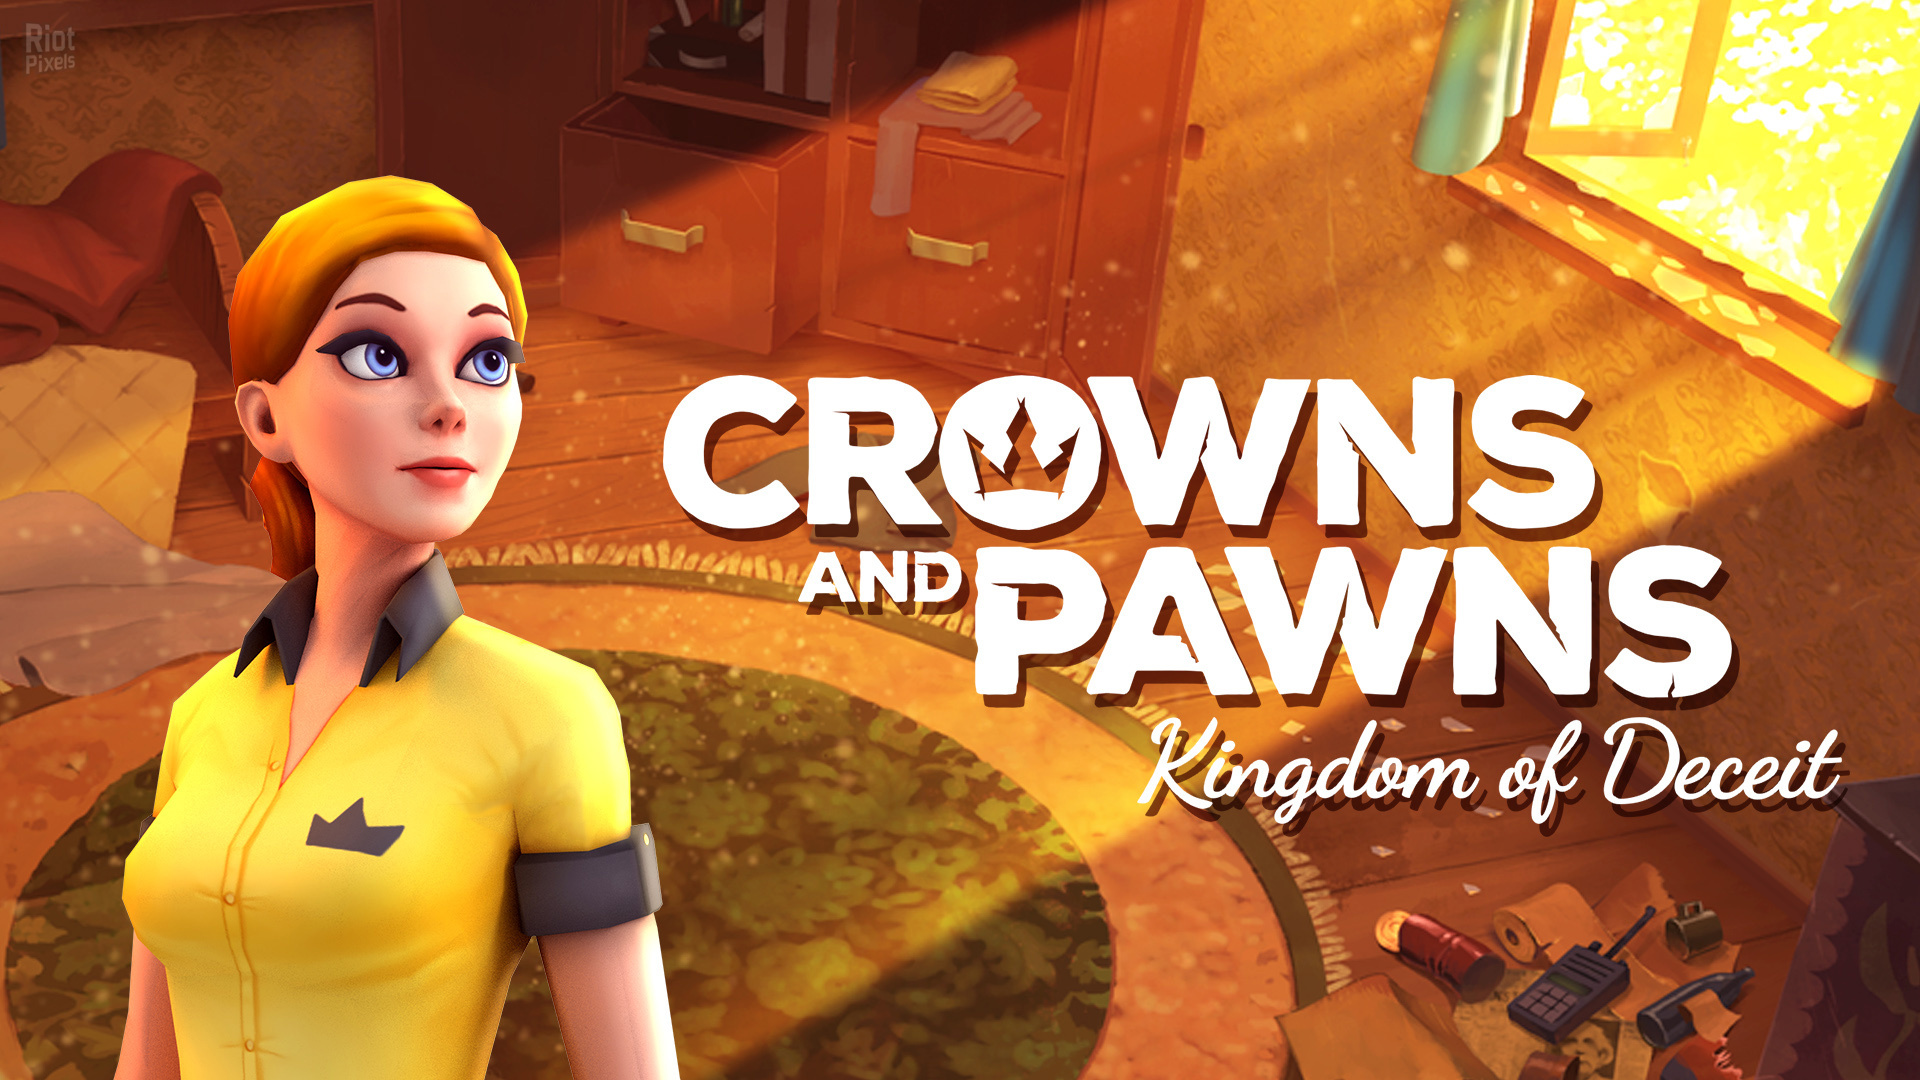 Crowns and Pawns: Kingdom of Deceit: Milda's adventures, Beautiful graphics and sound, and accessible interface. 1920x1080 Full HD Wallpaper.